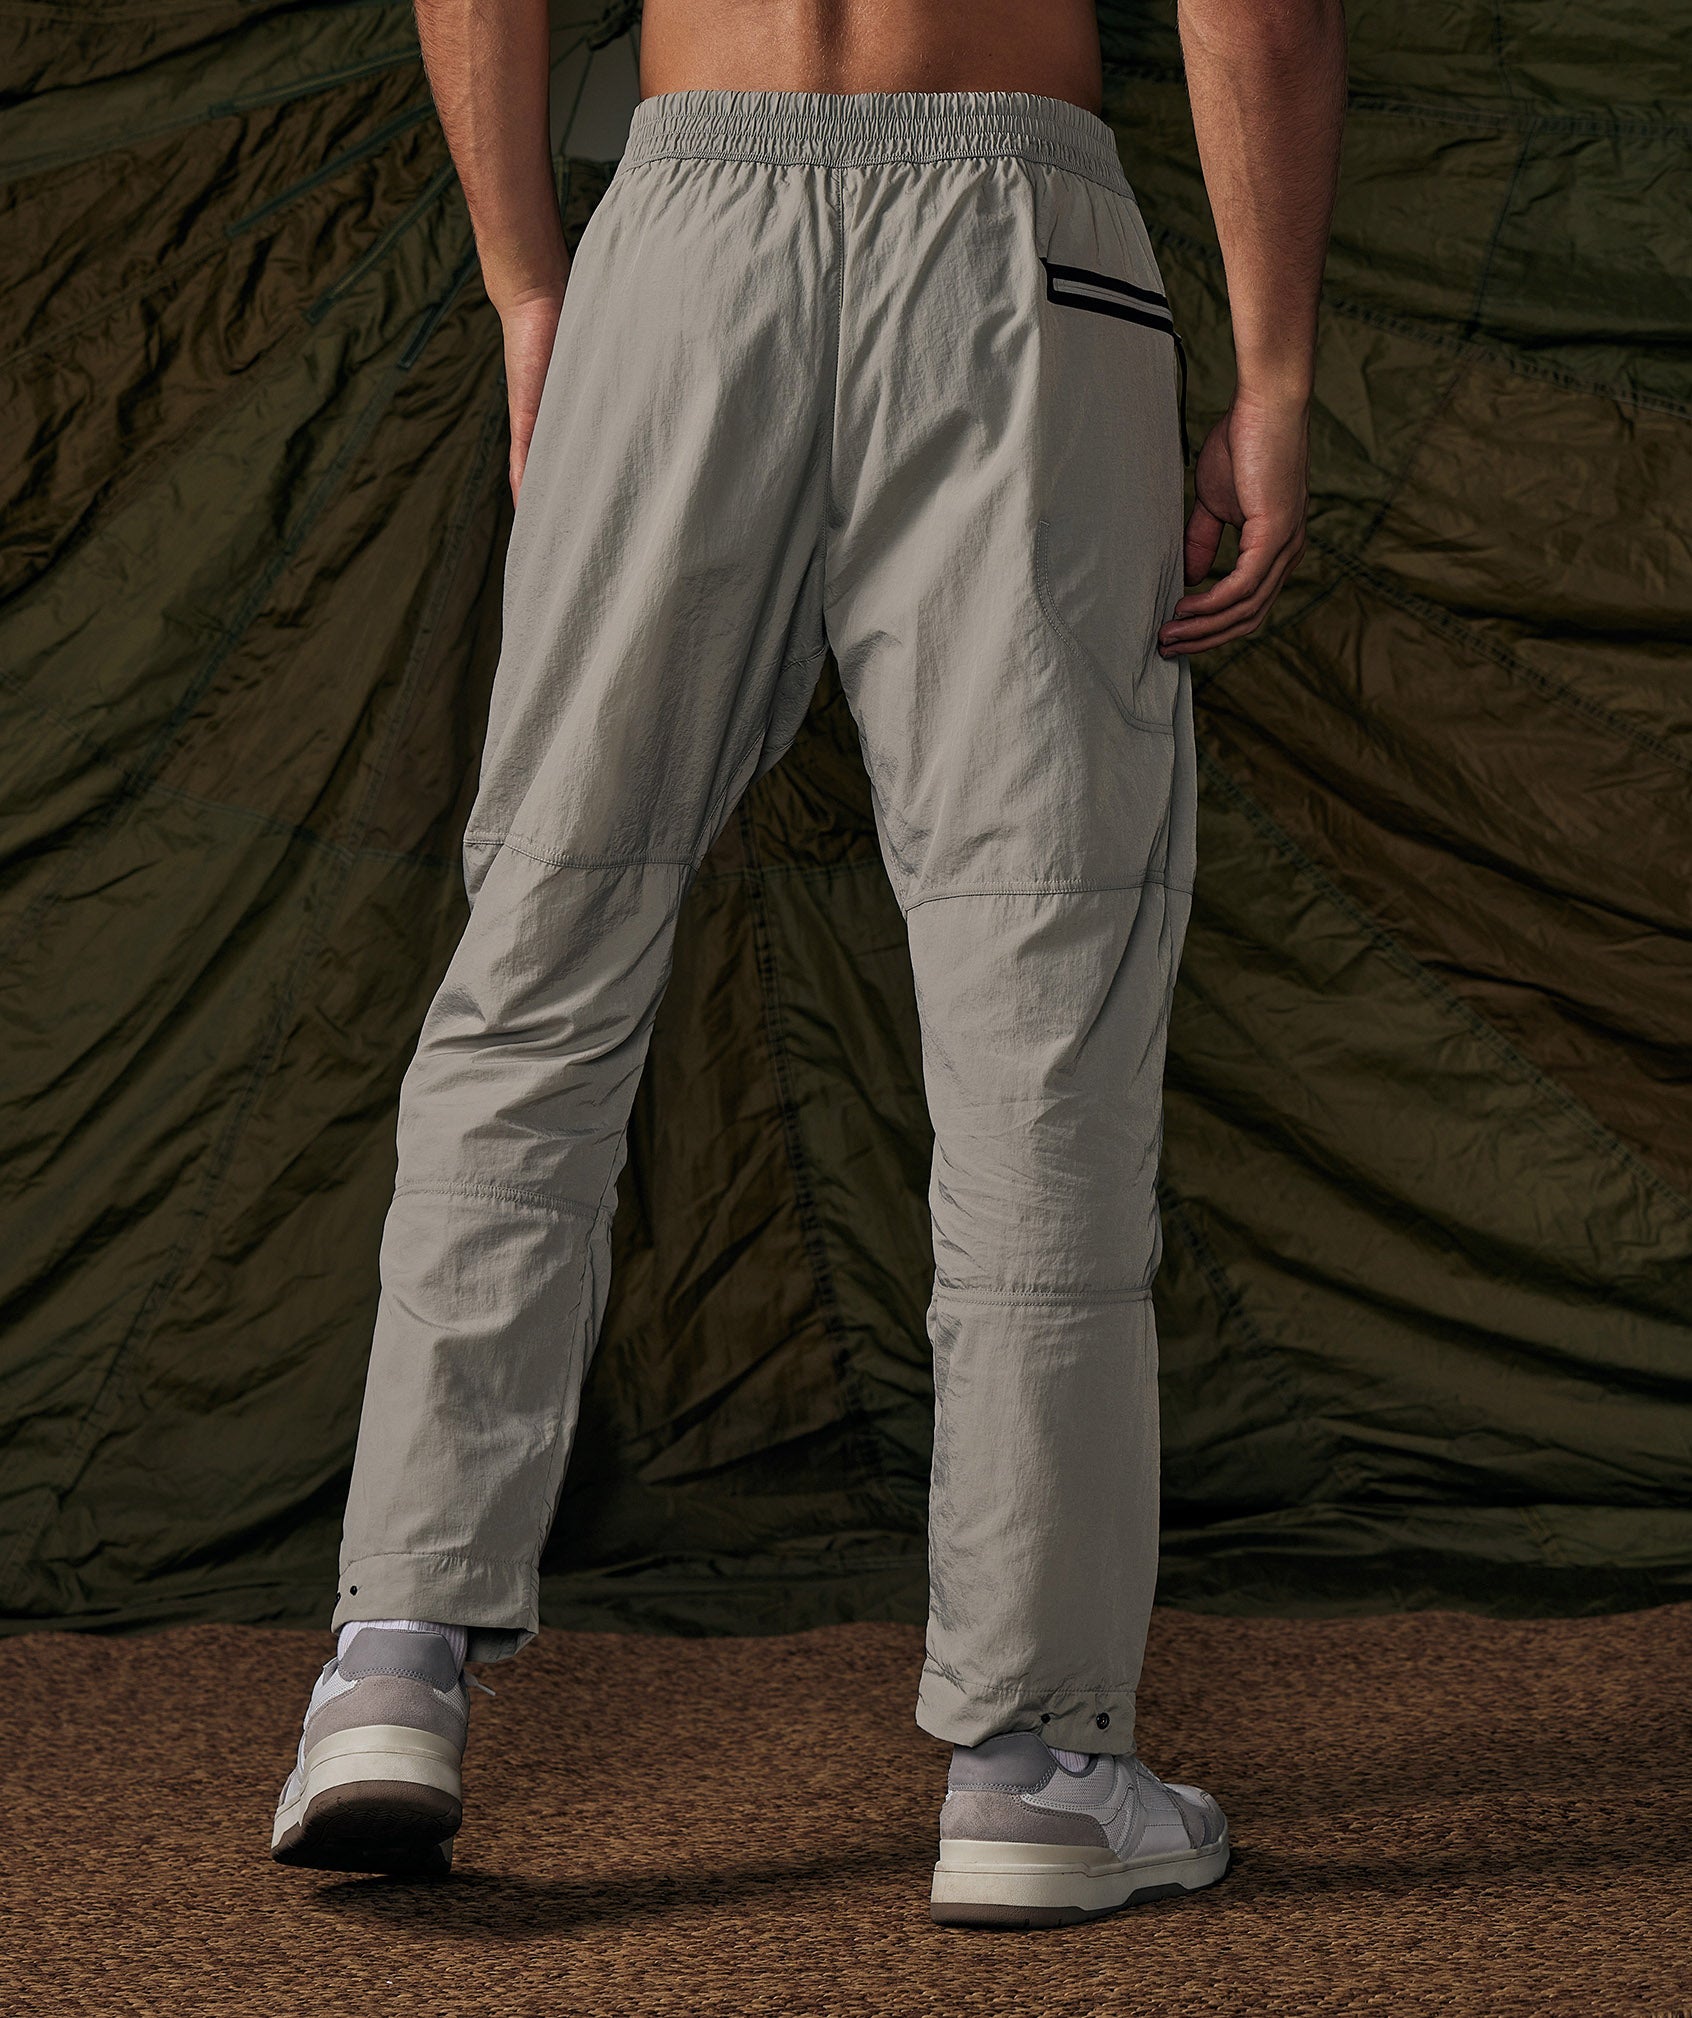 Retake Woven Joggers in Taupe Grey - view 2